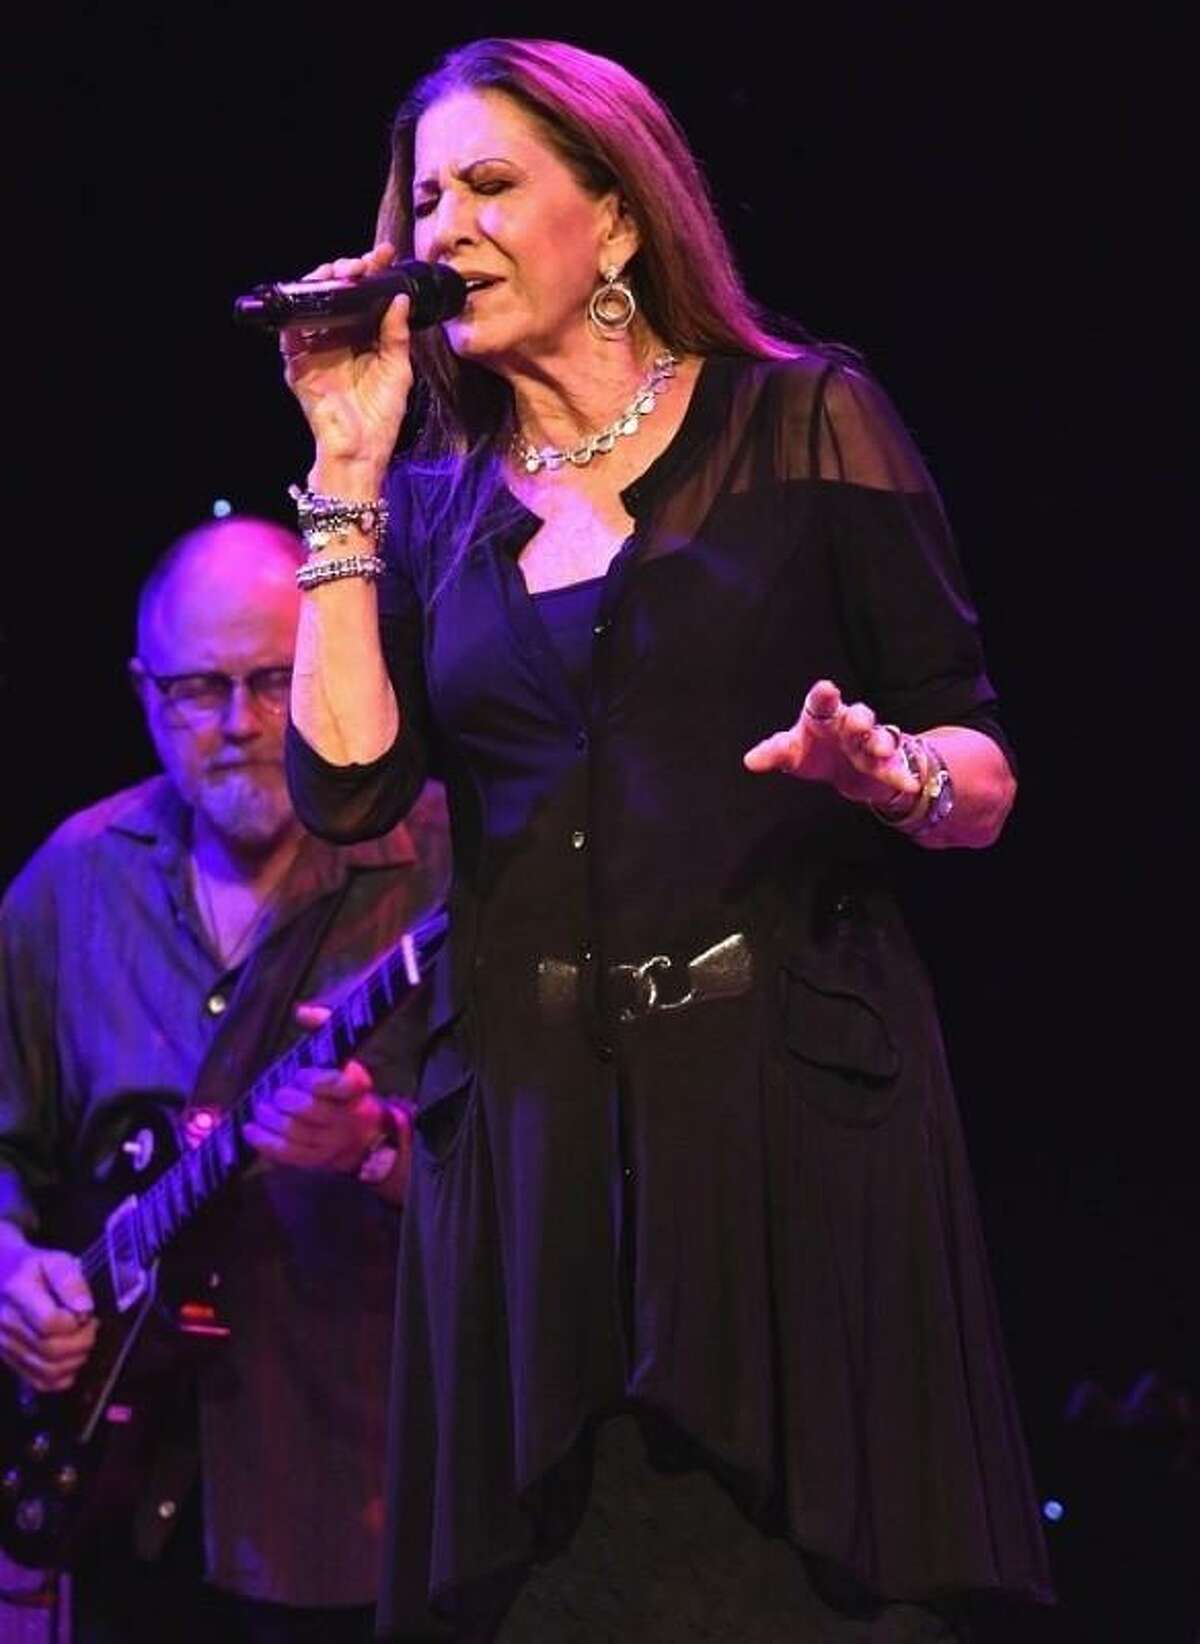 One of music’s most enduring voices and composers Rita Coolidge is shown singing with strong passion during her top shelf concert performance at the Infinity Music Hall in Hartford Sept. 13. Her show included music and stories from her near 50 year successful career. Rita is currently on tour in support of her latest album “Safe In The Arms of Time”. To learn more about Rita Coolidge and her new music you can visit www.ritacoolidge.net